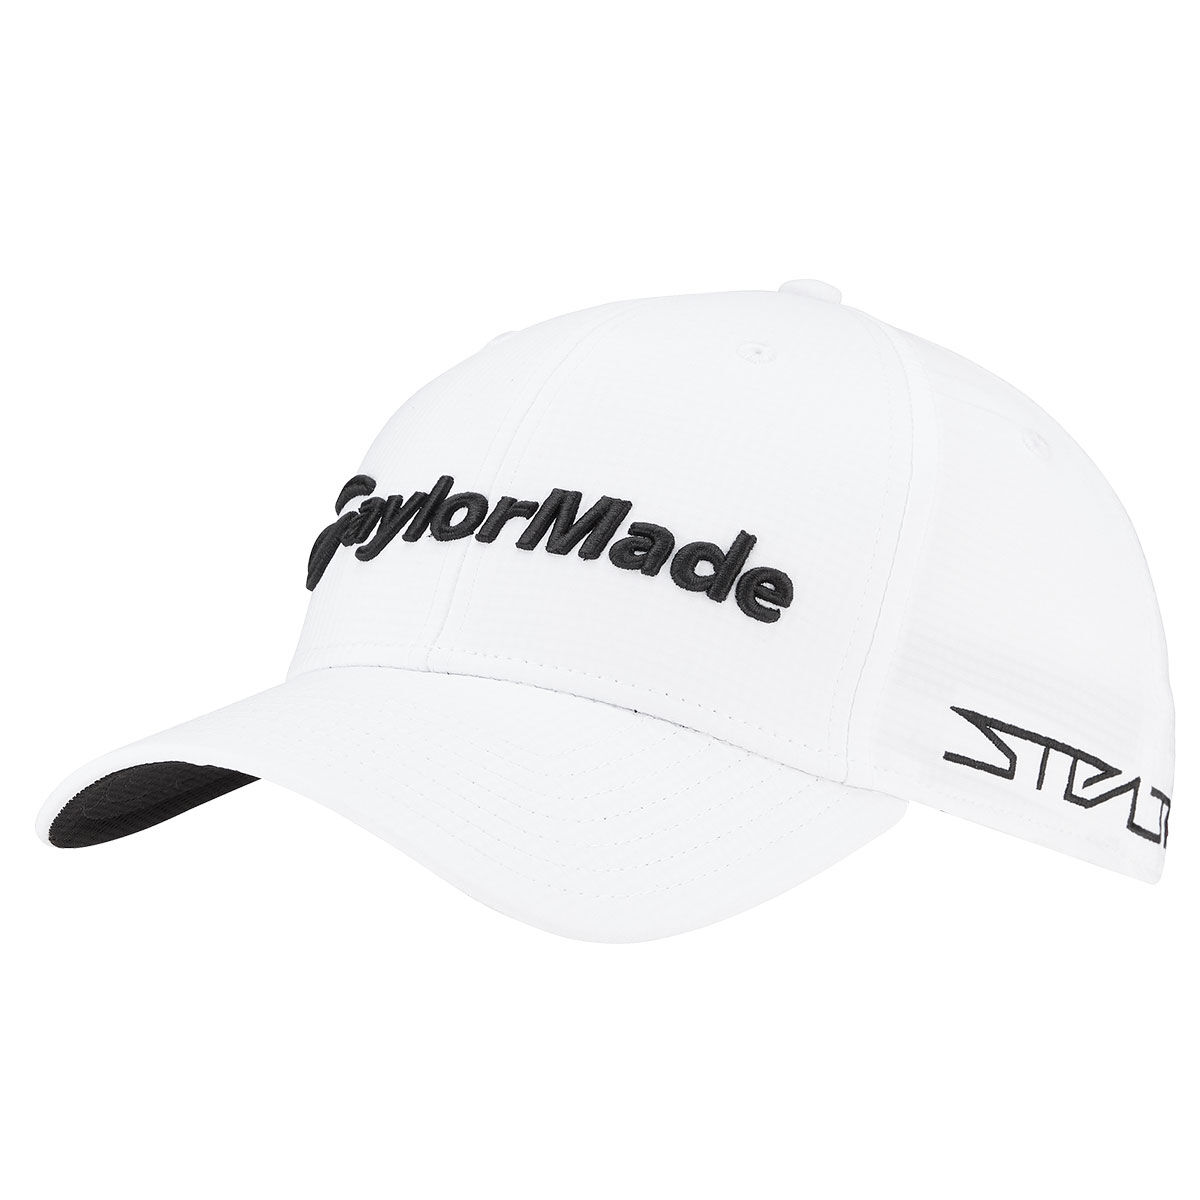 TaylorMade Golf Cap, Men’s White and Black Comfortable Embroidered Tour Radar | American Golf, One Size